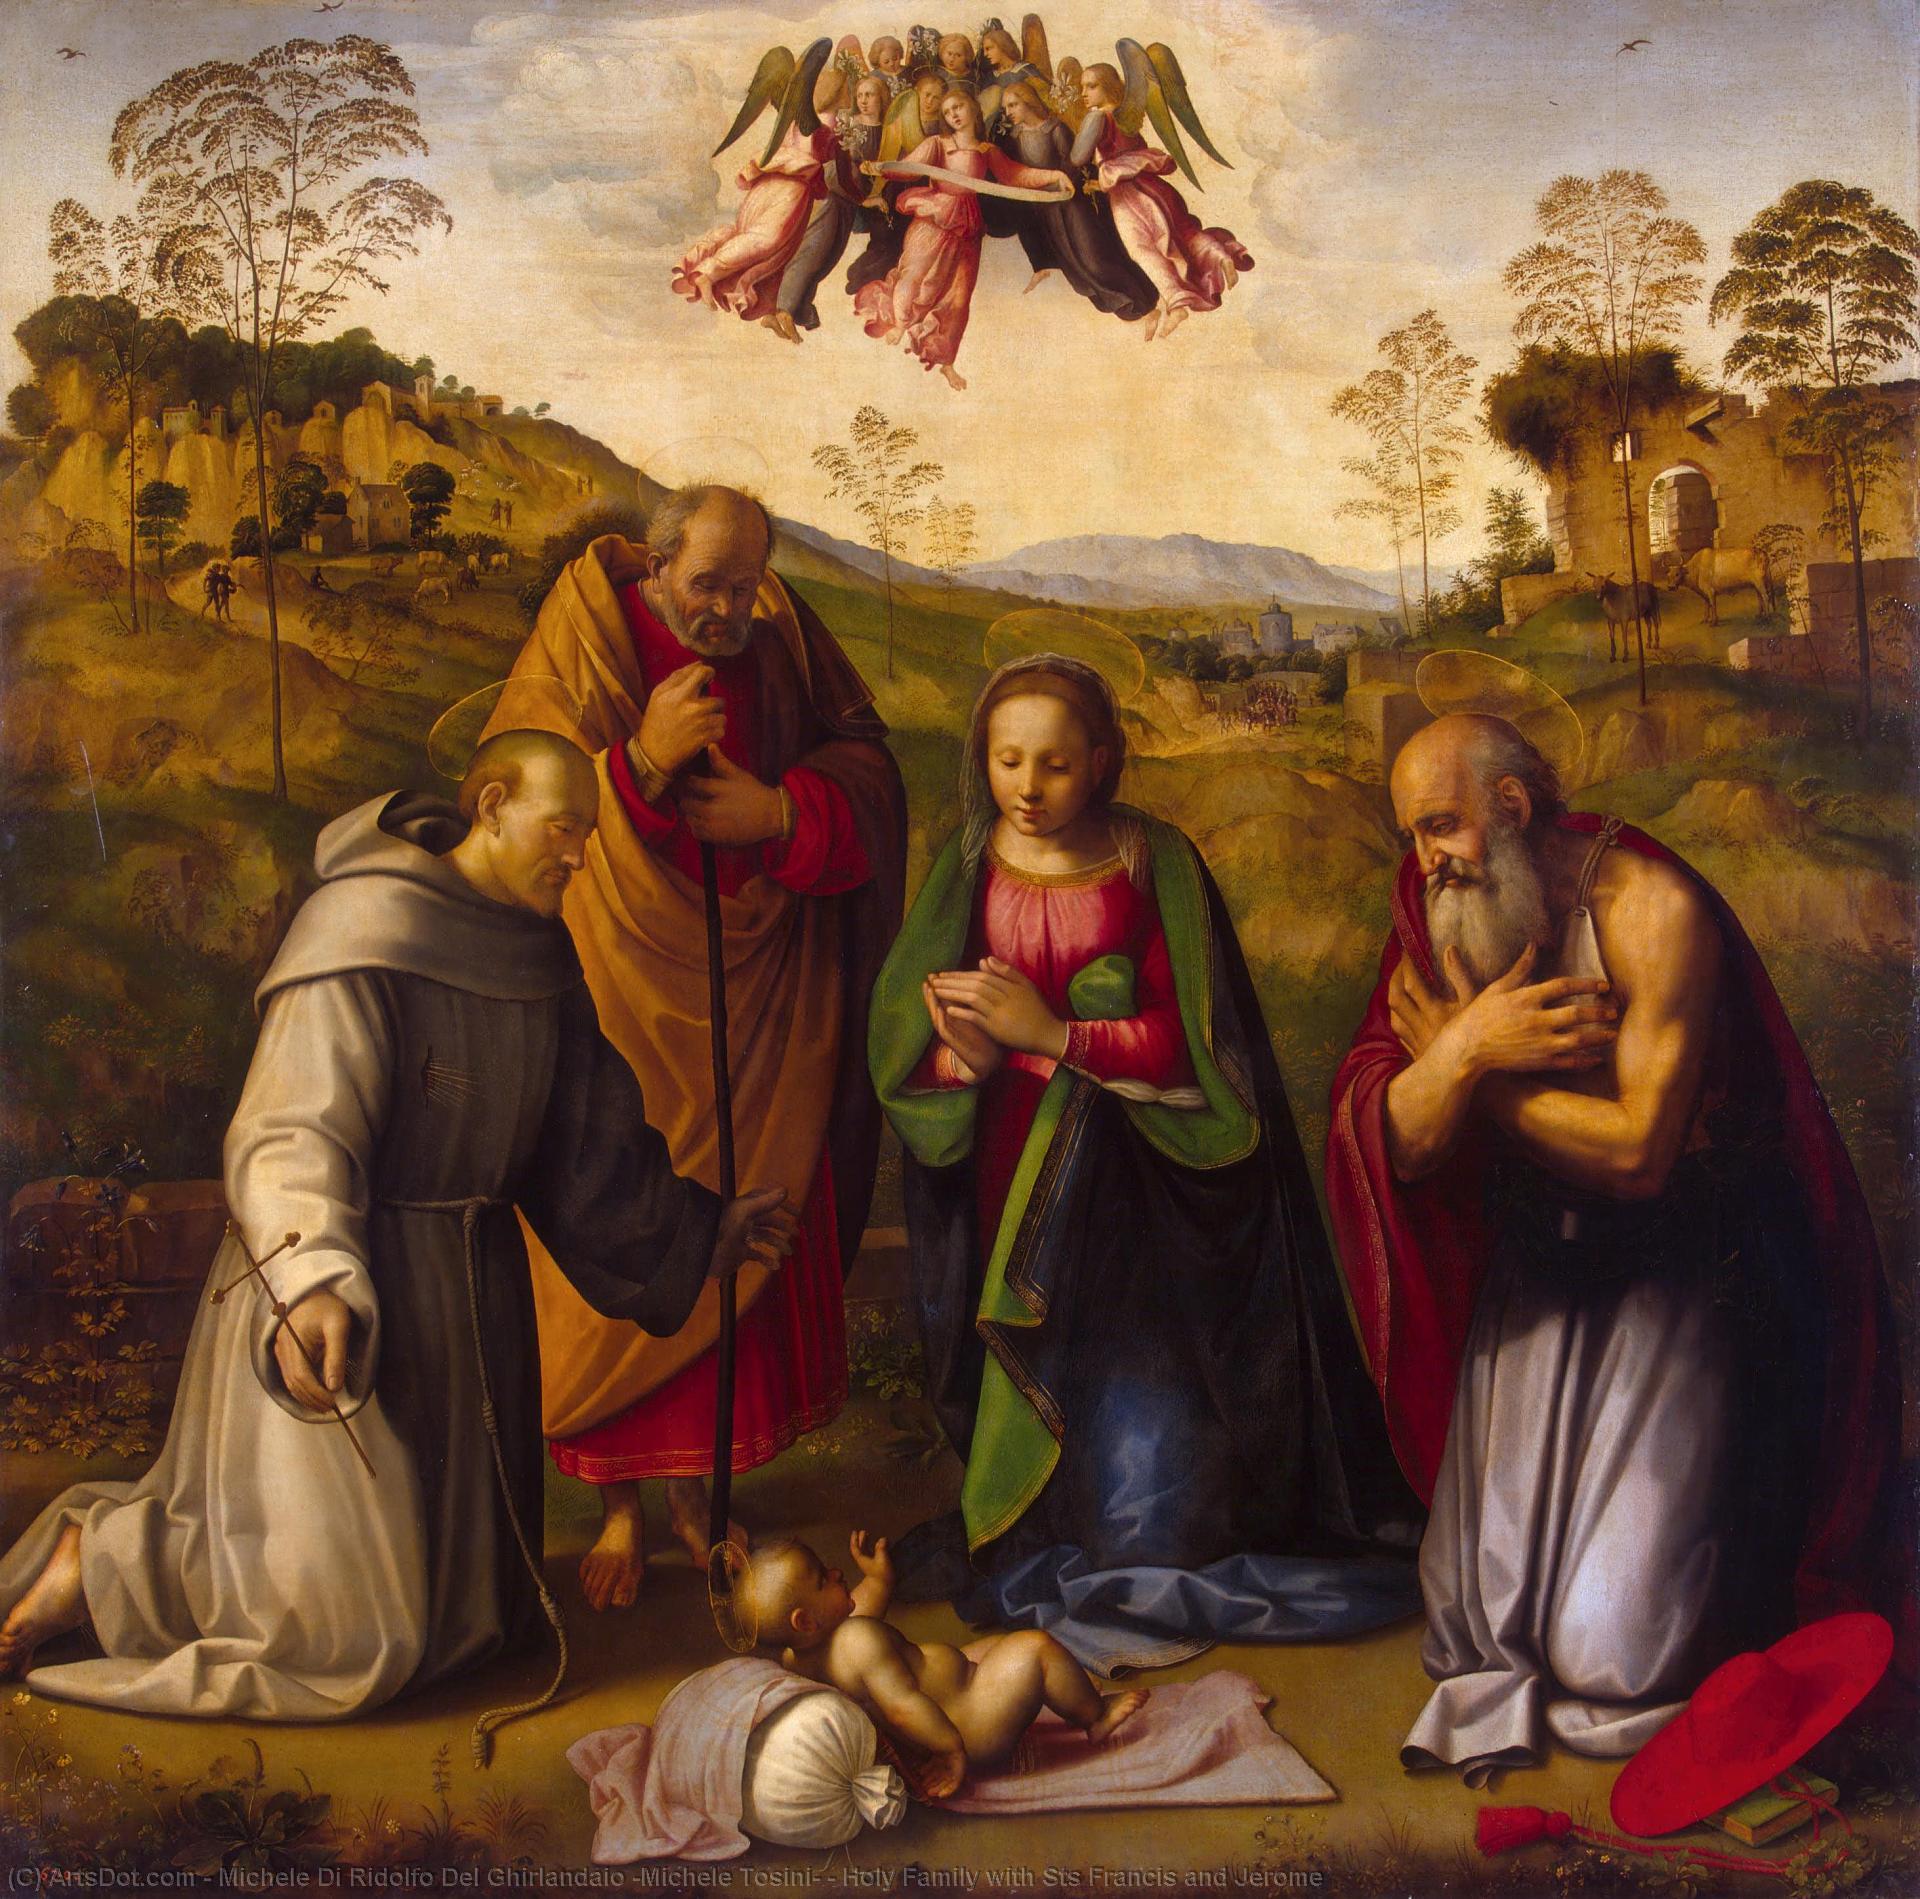 WikiOO.org - Encyclopedia of Fine Arts - Lukisan, Artwork Michele Di Ridolfo Del Ghirlandaio (Michele Tosini) - Holy Family with Sts Francis and Jerome